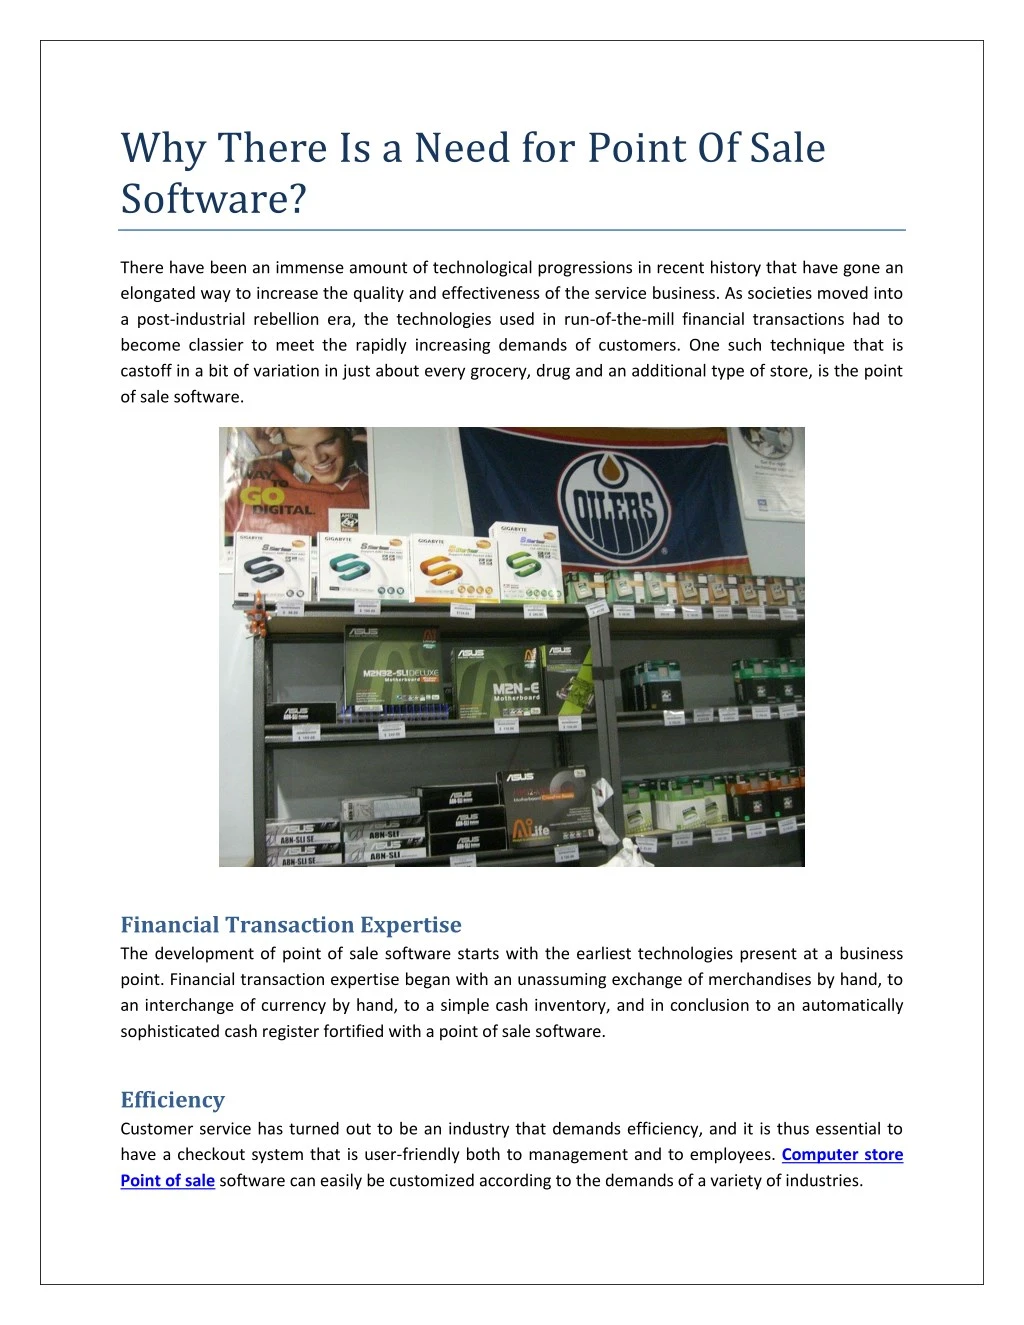 why there is a need for point of sale software